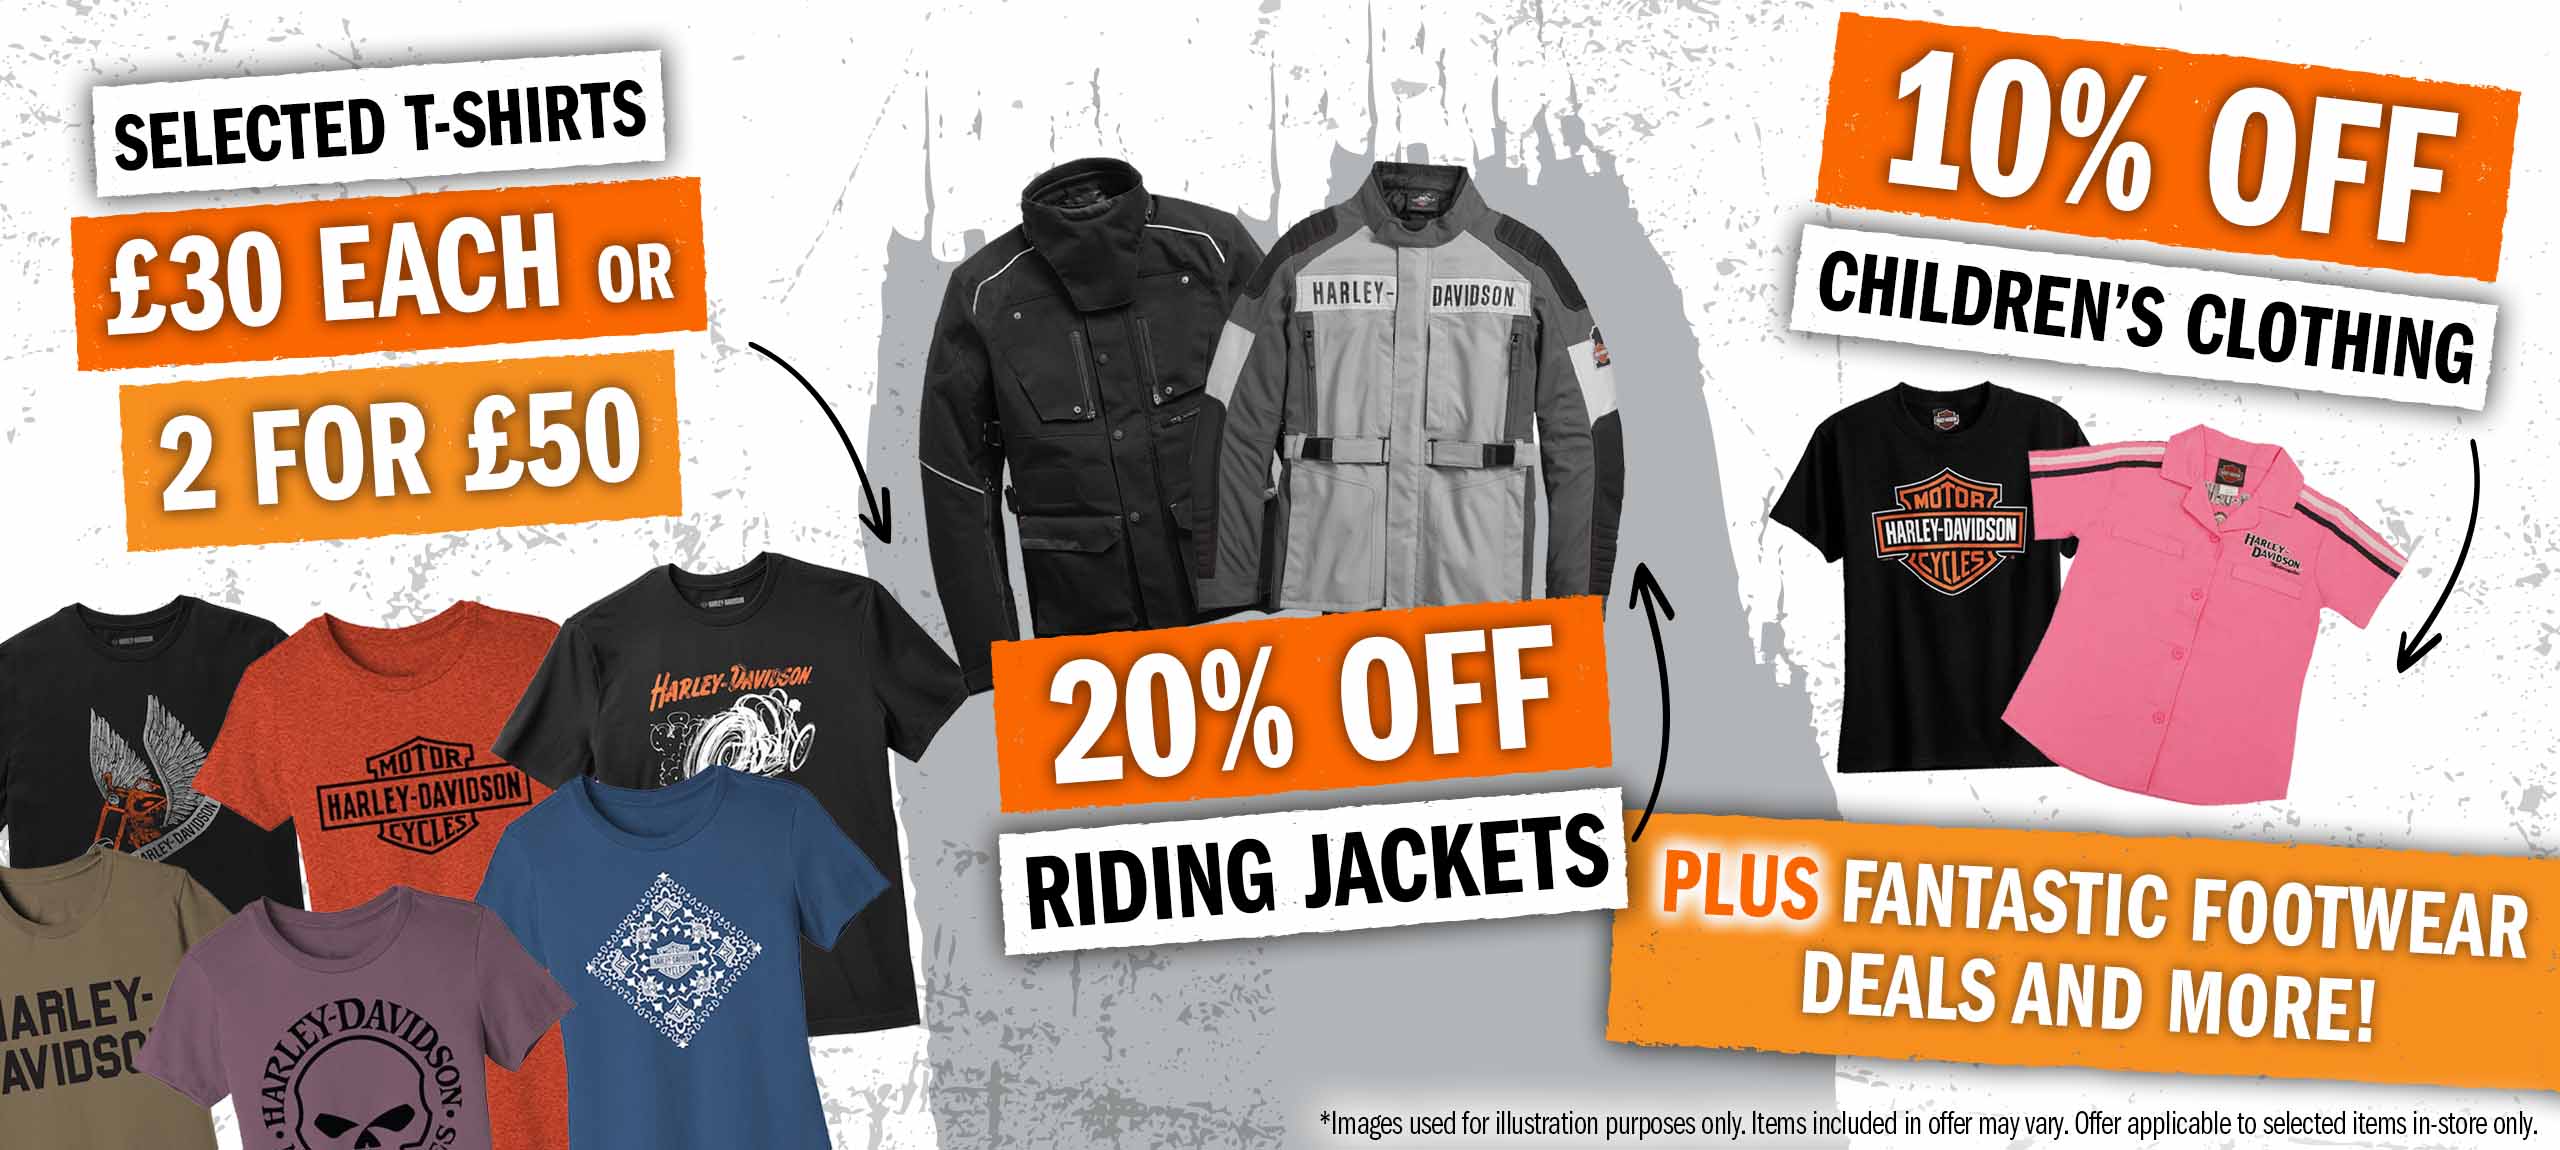 Clothing Offers for Maidstone Harley-Davidsons End of Summer Specials